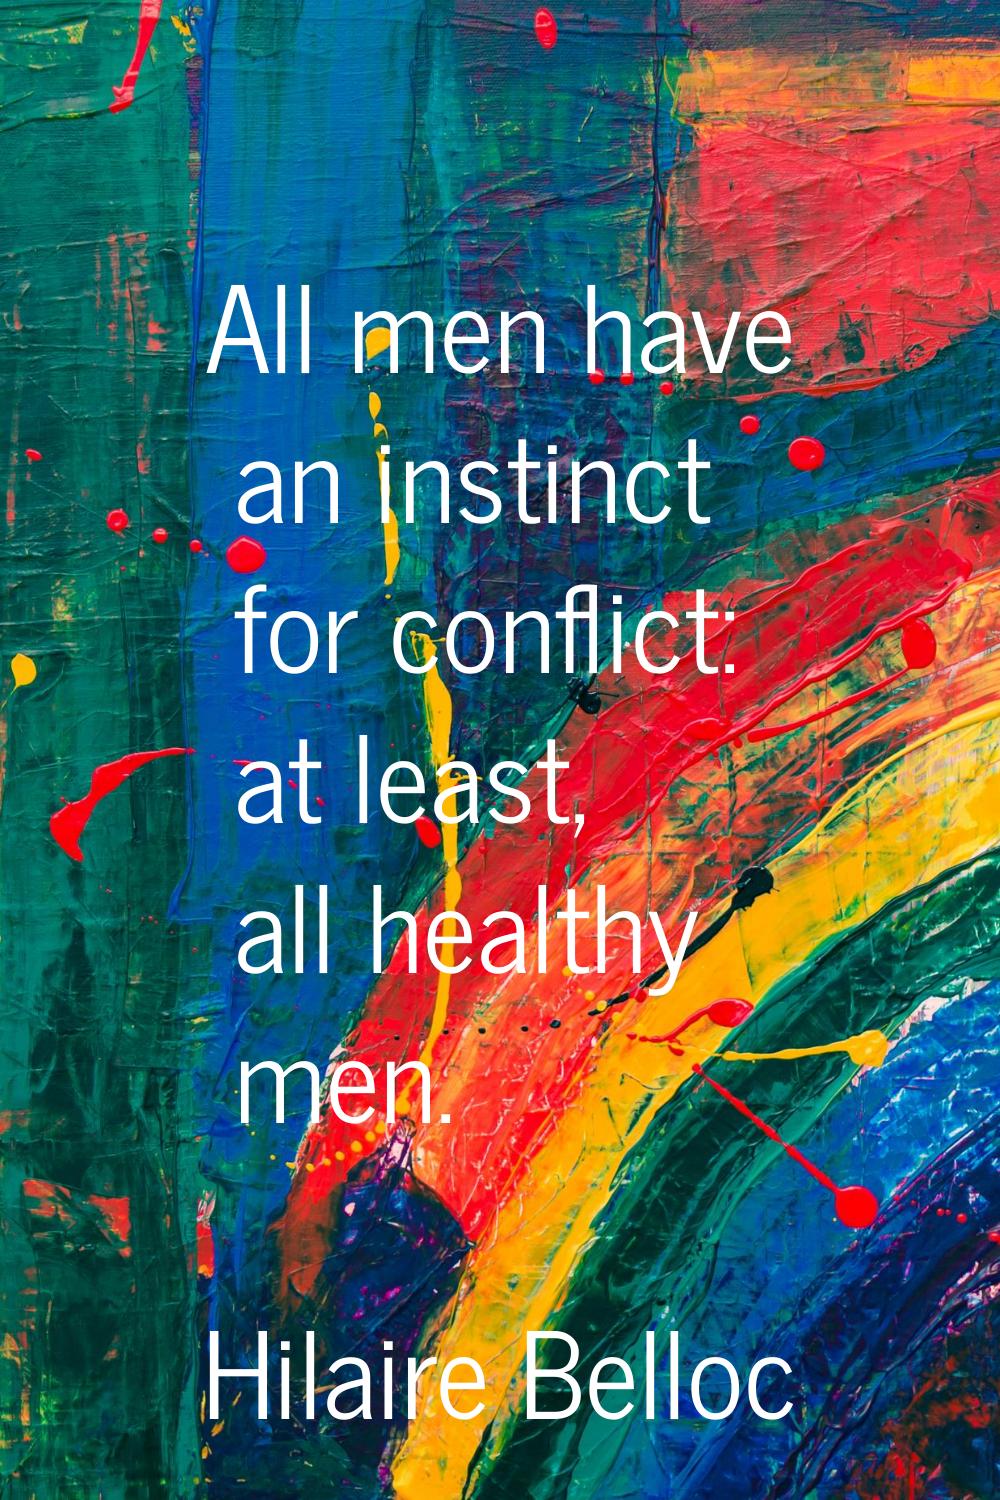 All men have an instinct for conflict: at least, all healthy men.